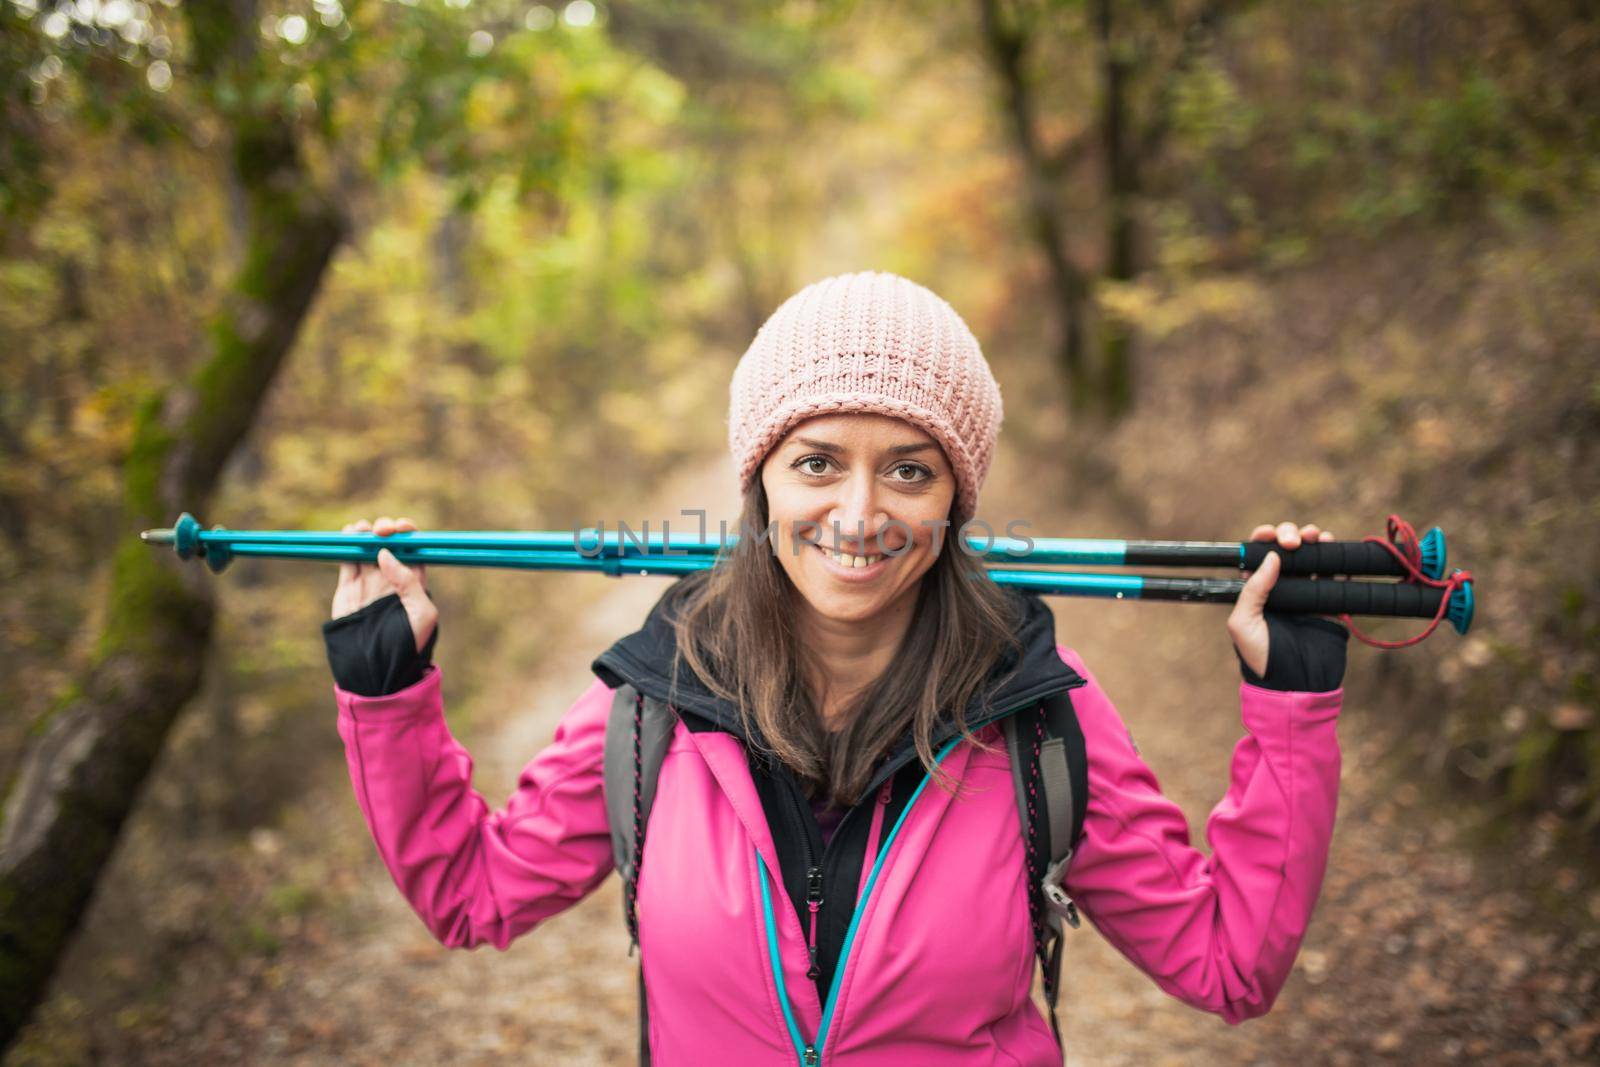 Hiker girl in pink on a trail in the forest. Looking at camera with poles in hands. Nature in fall season. by kokimk